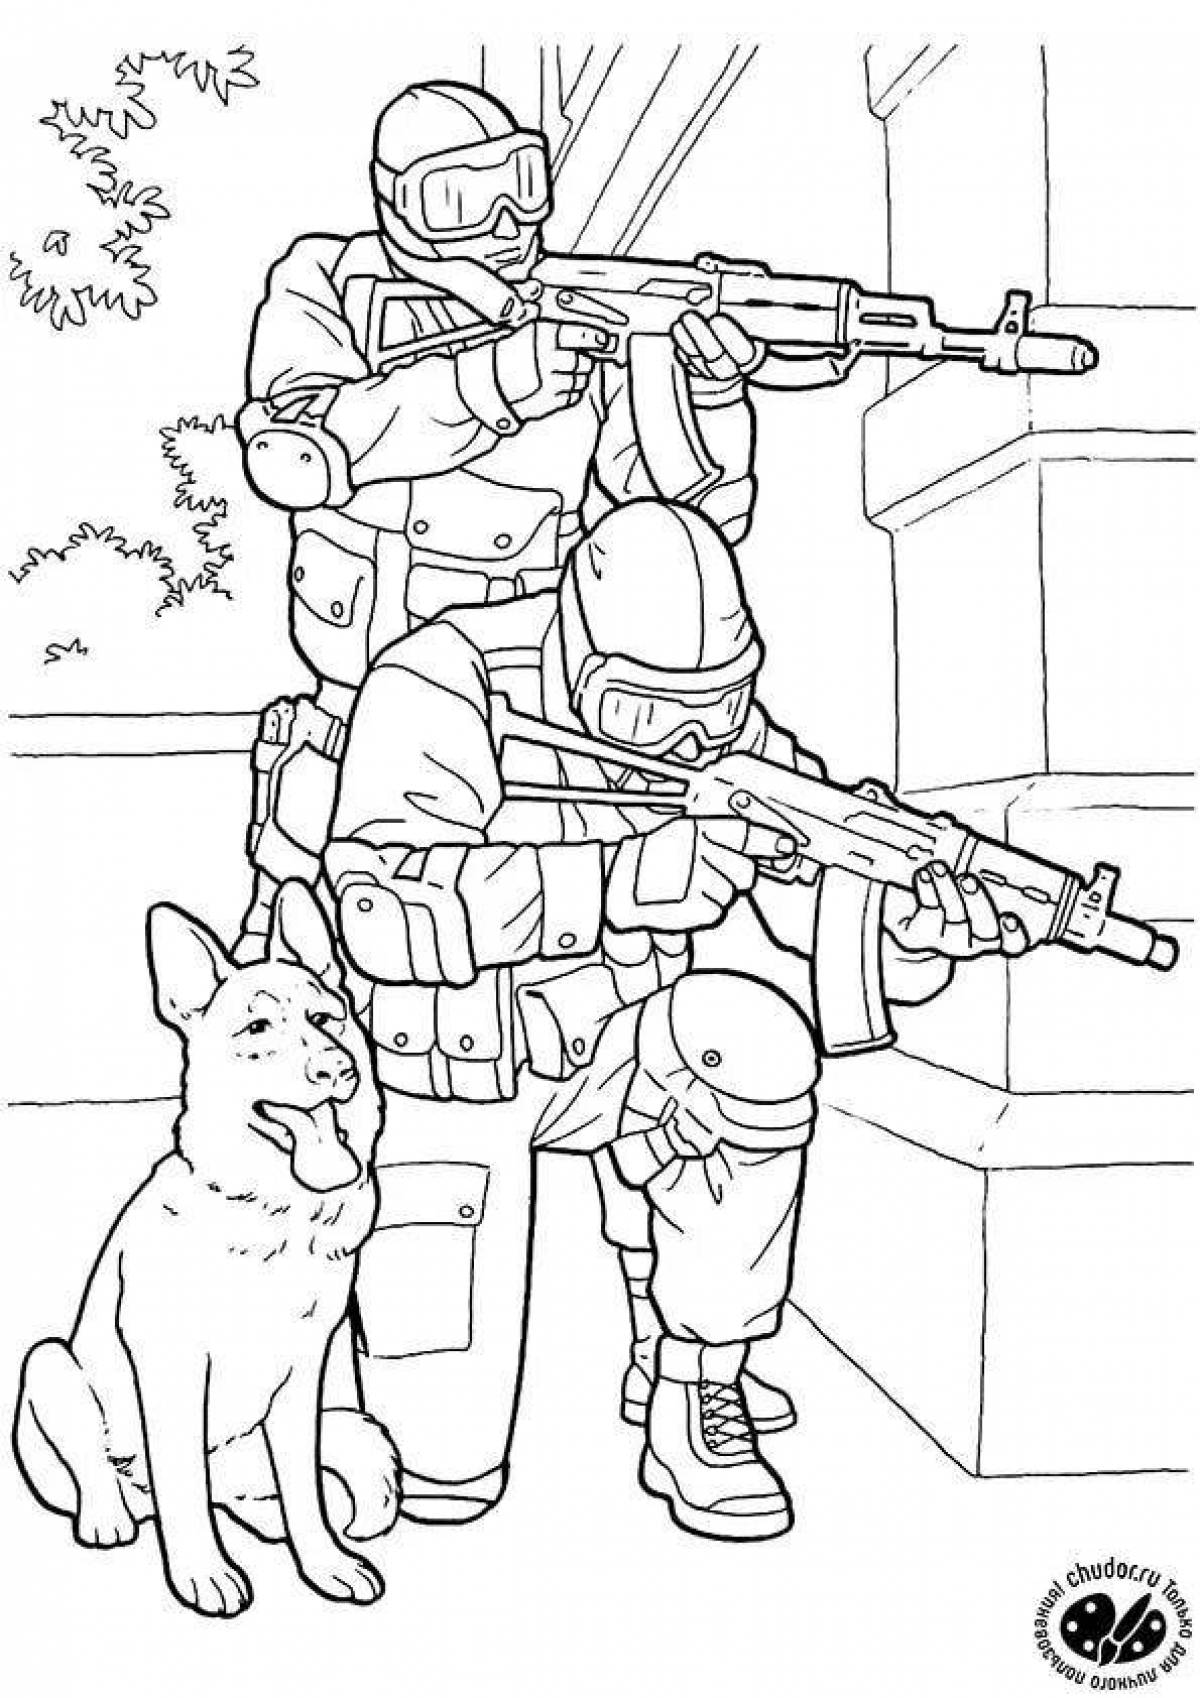 Coloring book brave soldier with dog